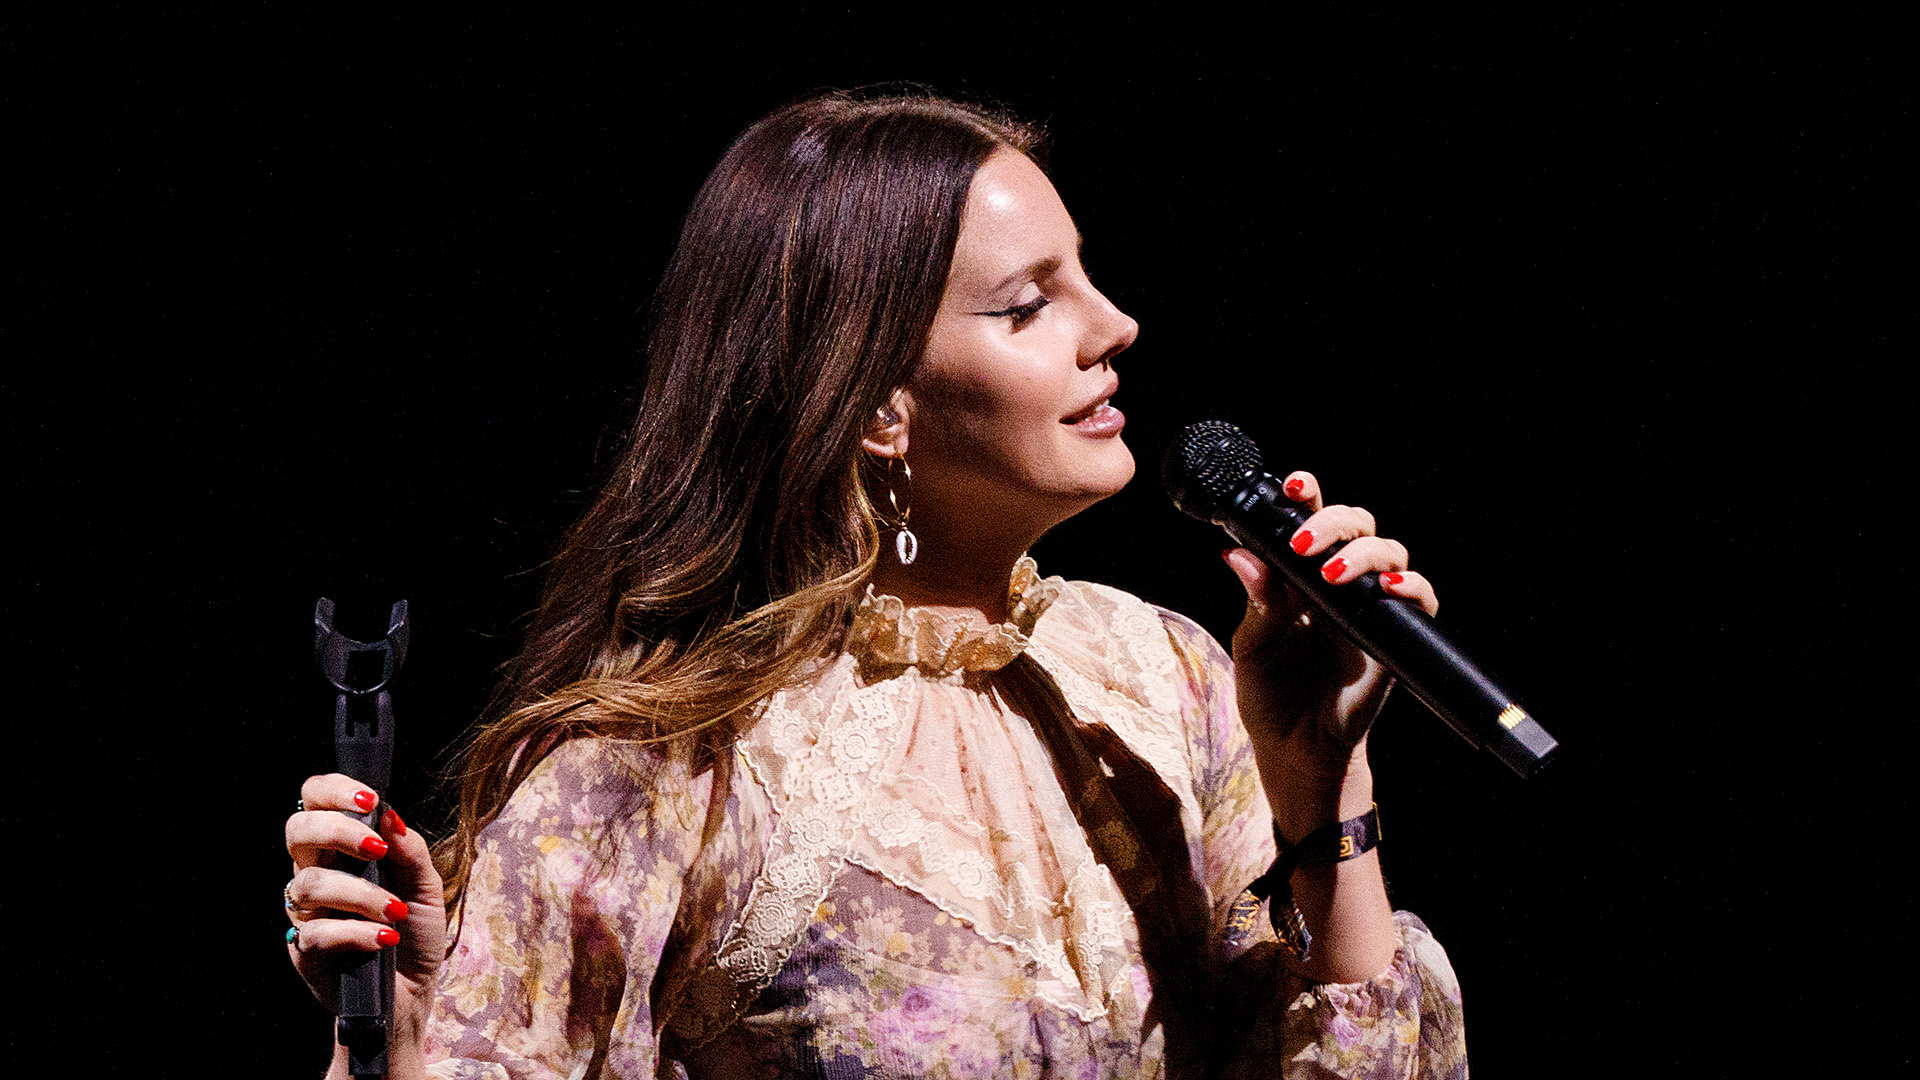 Singer-songwriter Lana Del Rey performs on stage at Rogers Arena on September 30, 2019 in Vancouver, Canada.